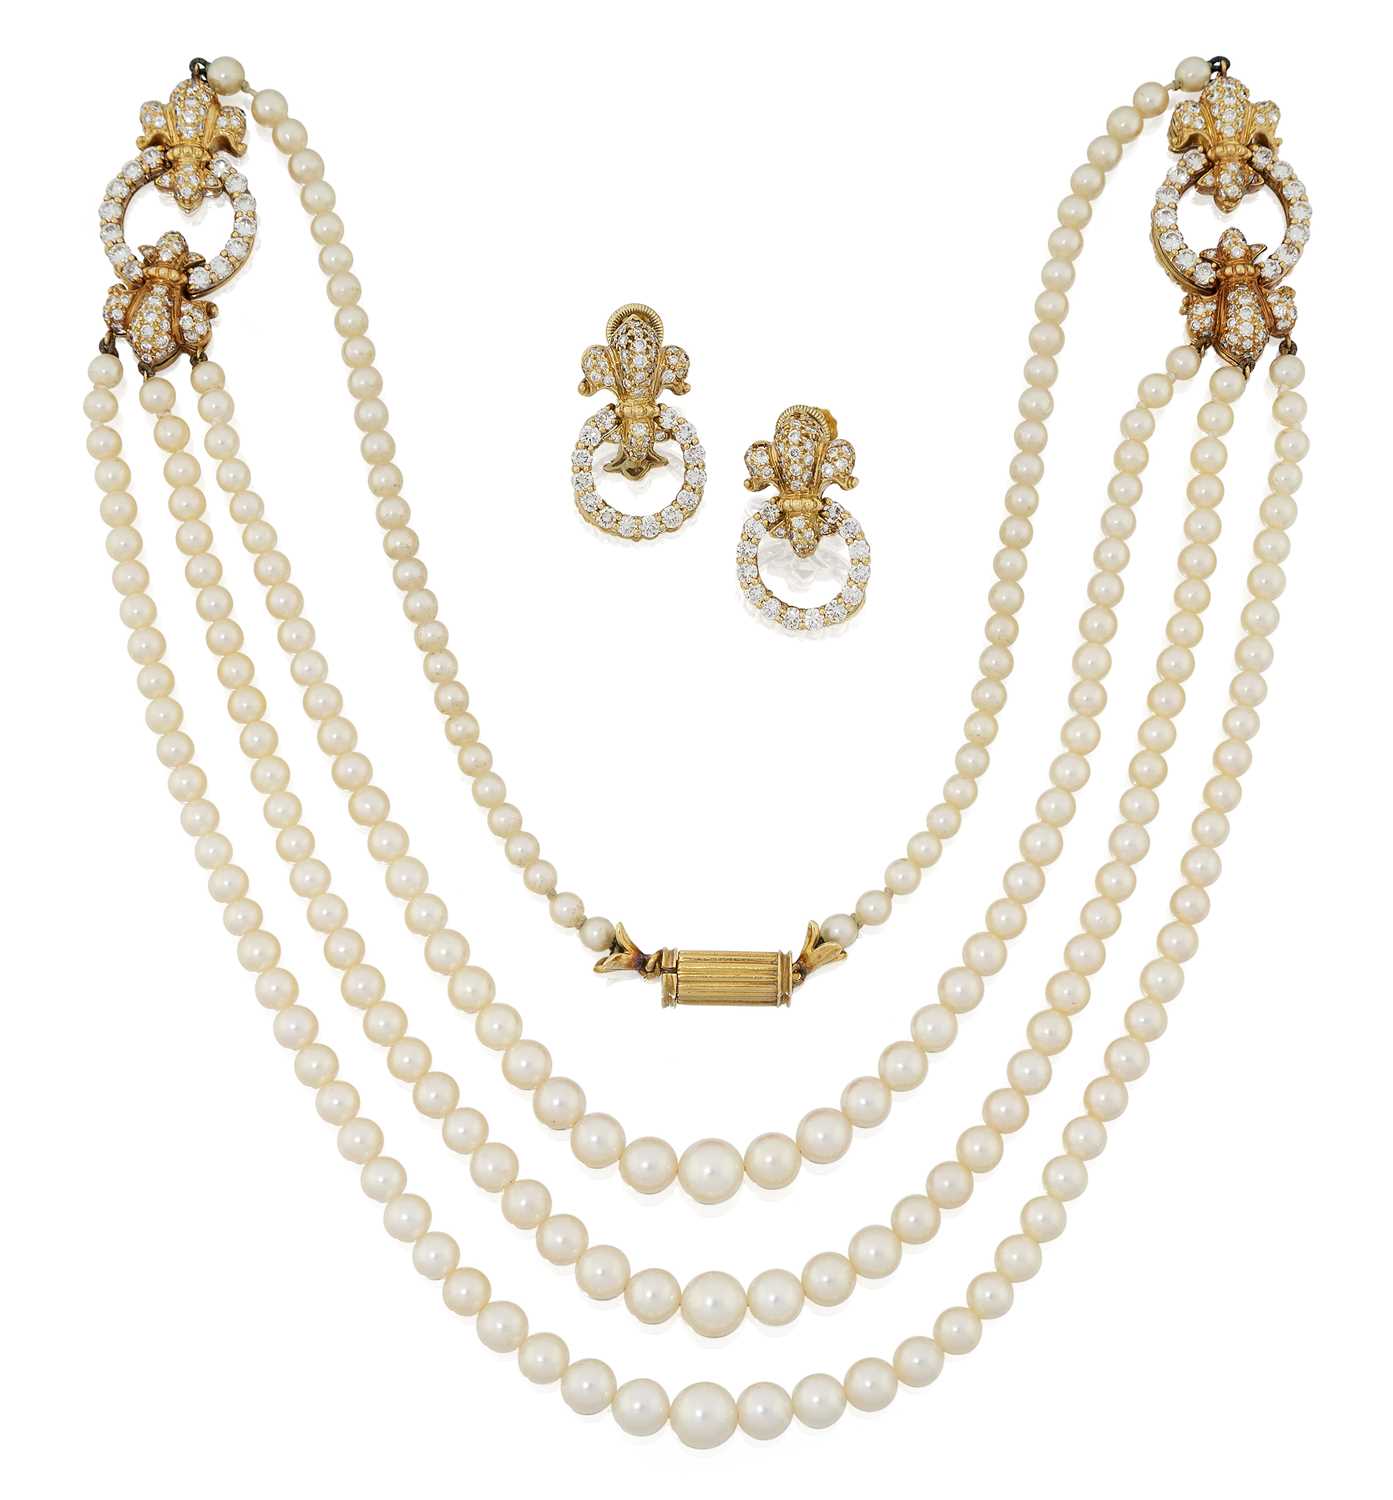 An 18 Carat Gold Cultured Pearl and Diamond Necklace, by Hennell and A Pair of Matching Drop Earring